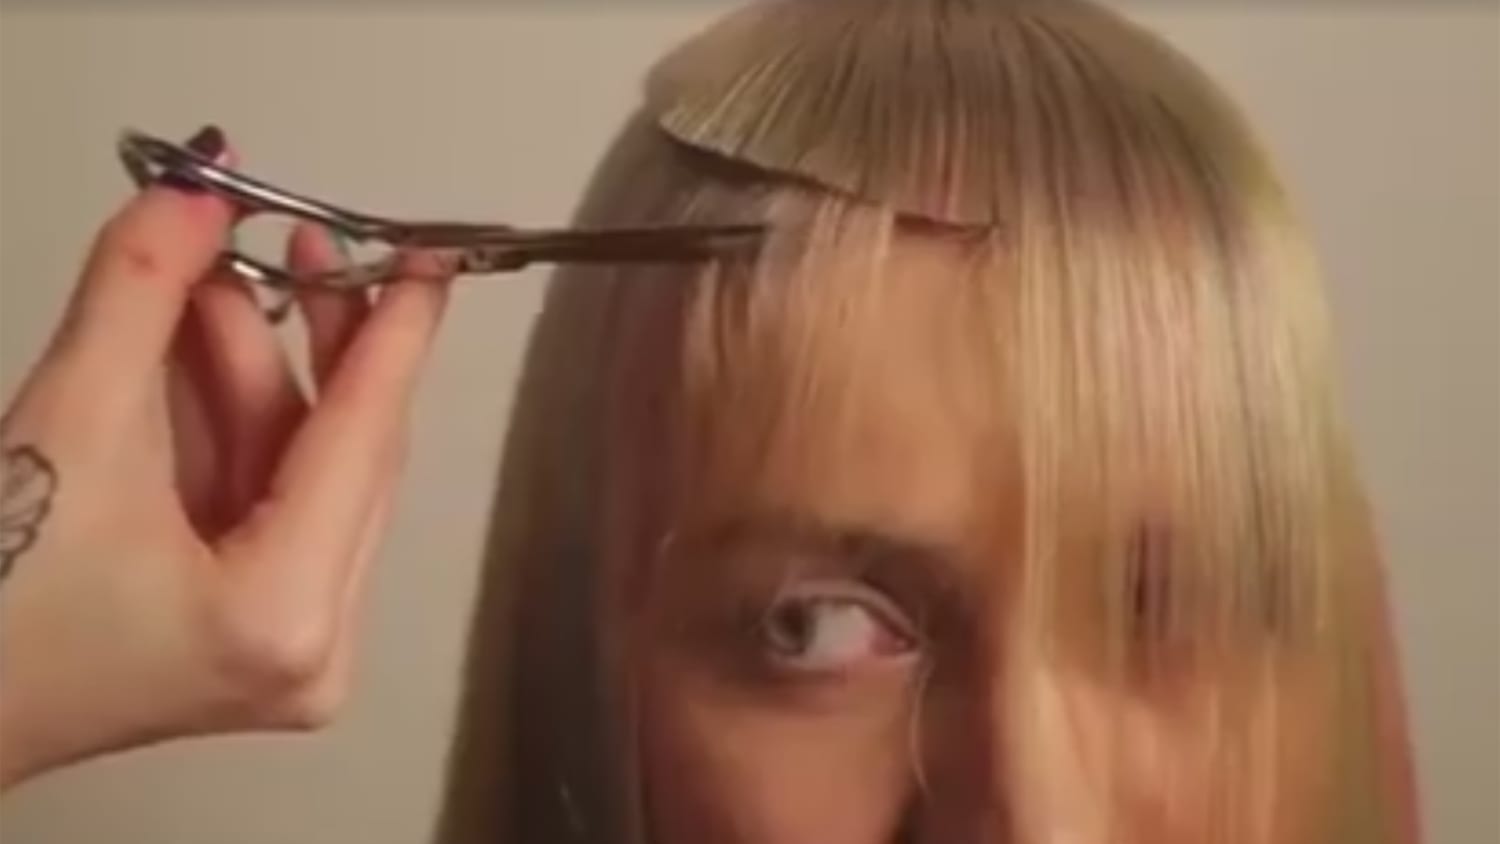 Extreme haircut gets blunt reaction from the Internet